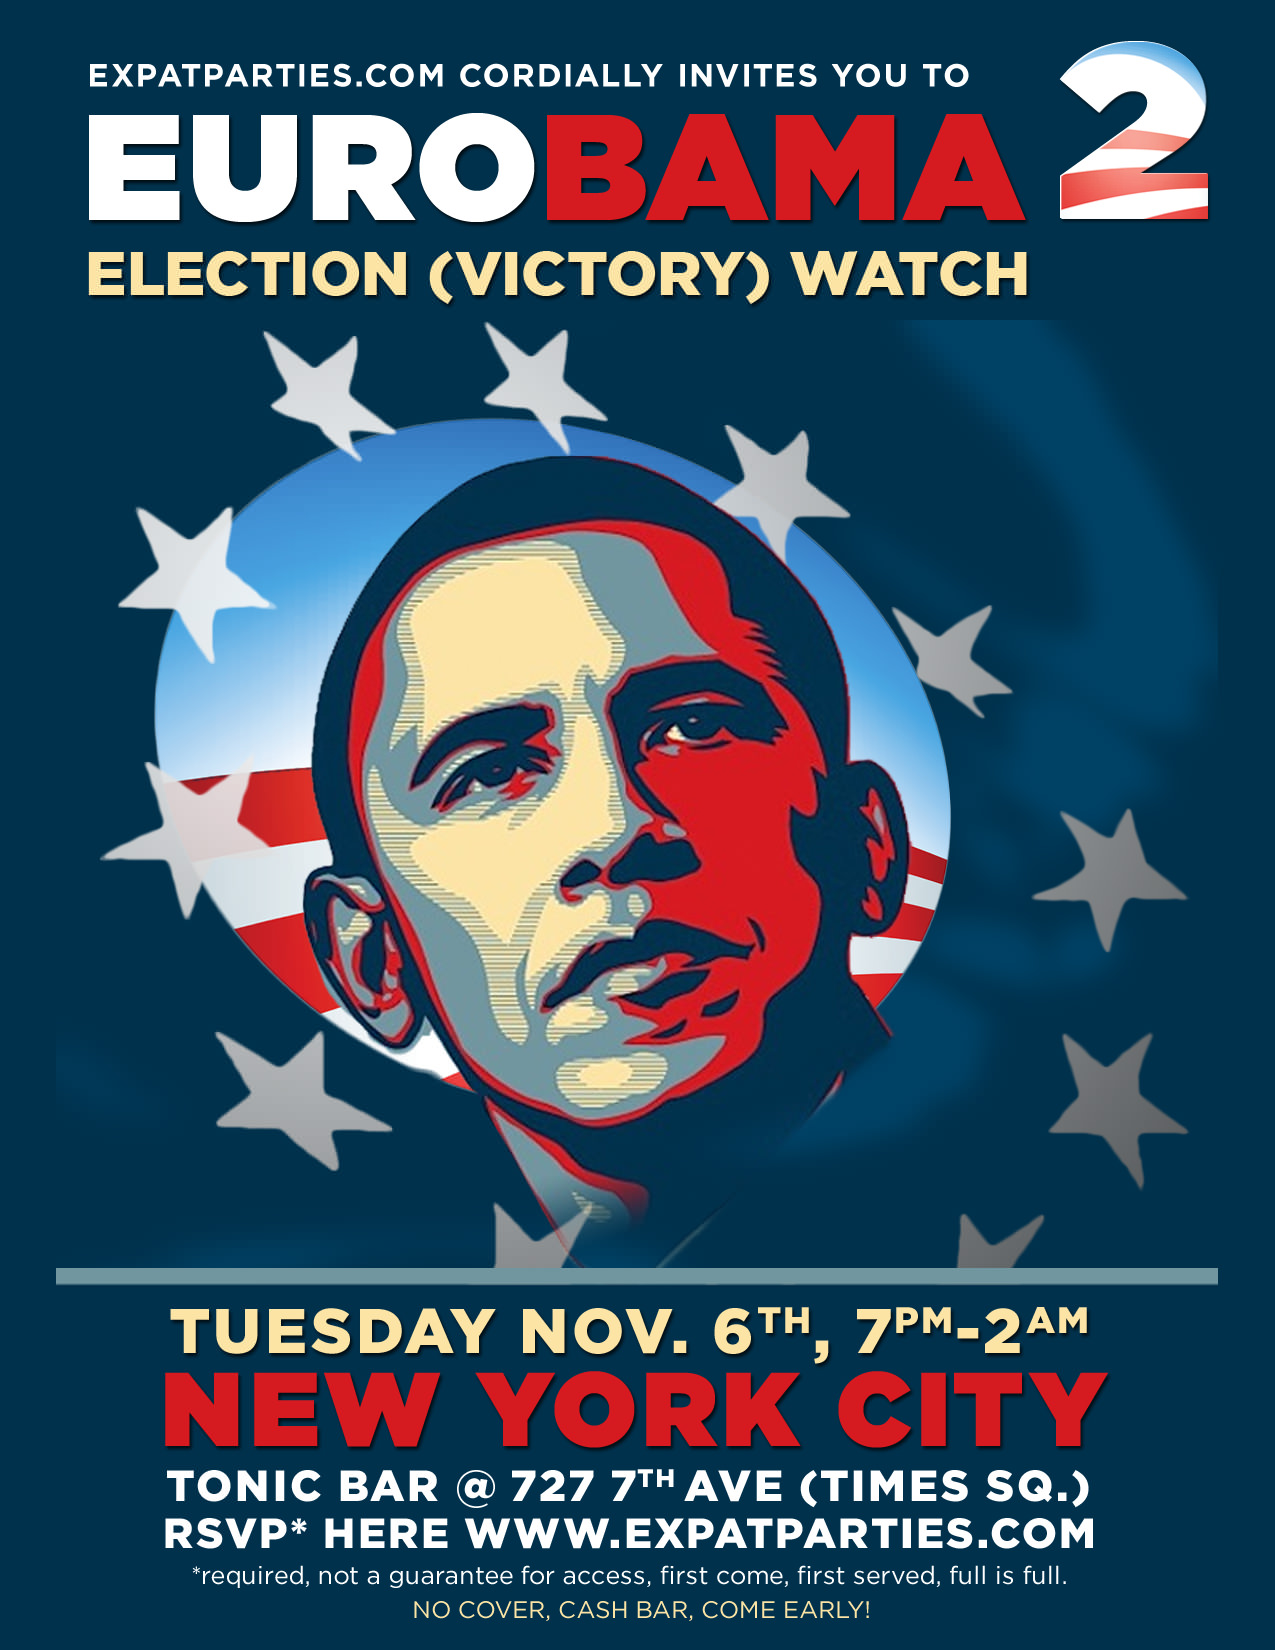 EuroBama 2 - Election Victory Watch Invite 2012